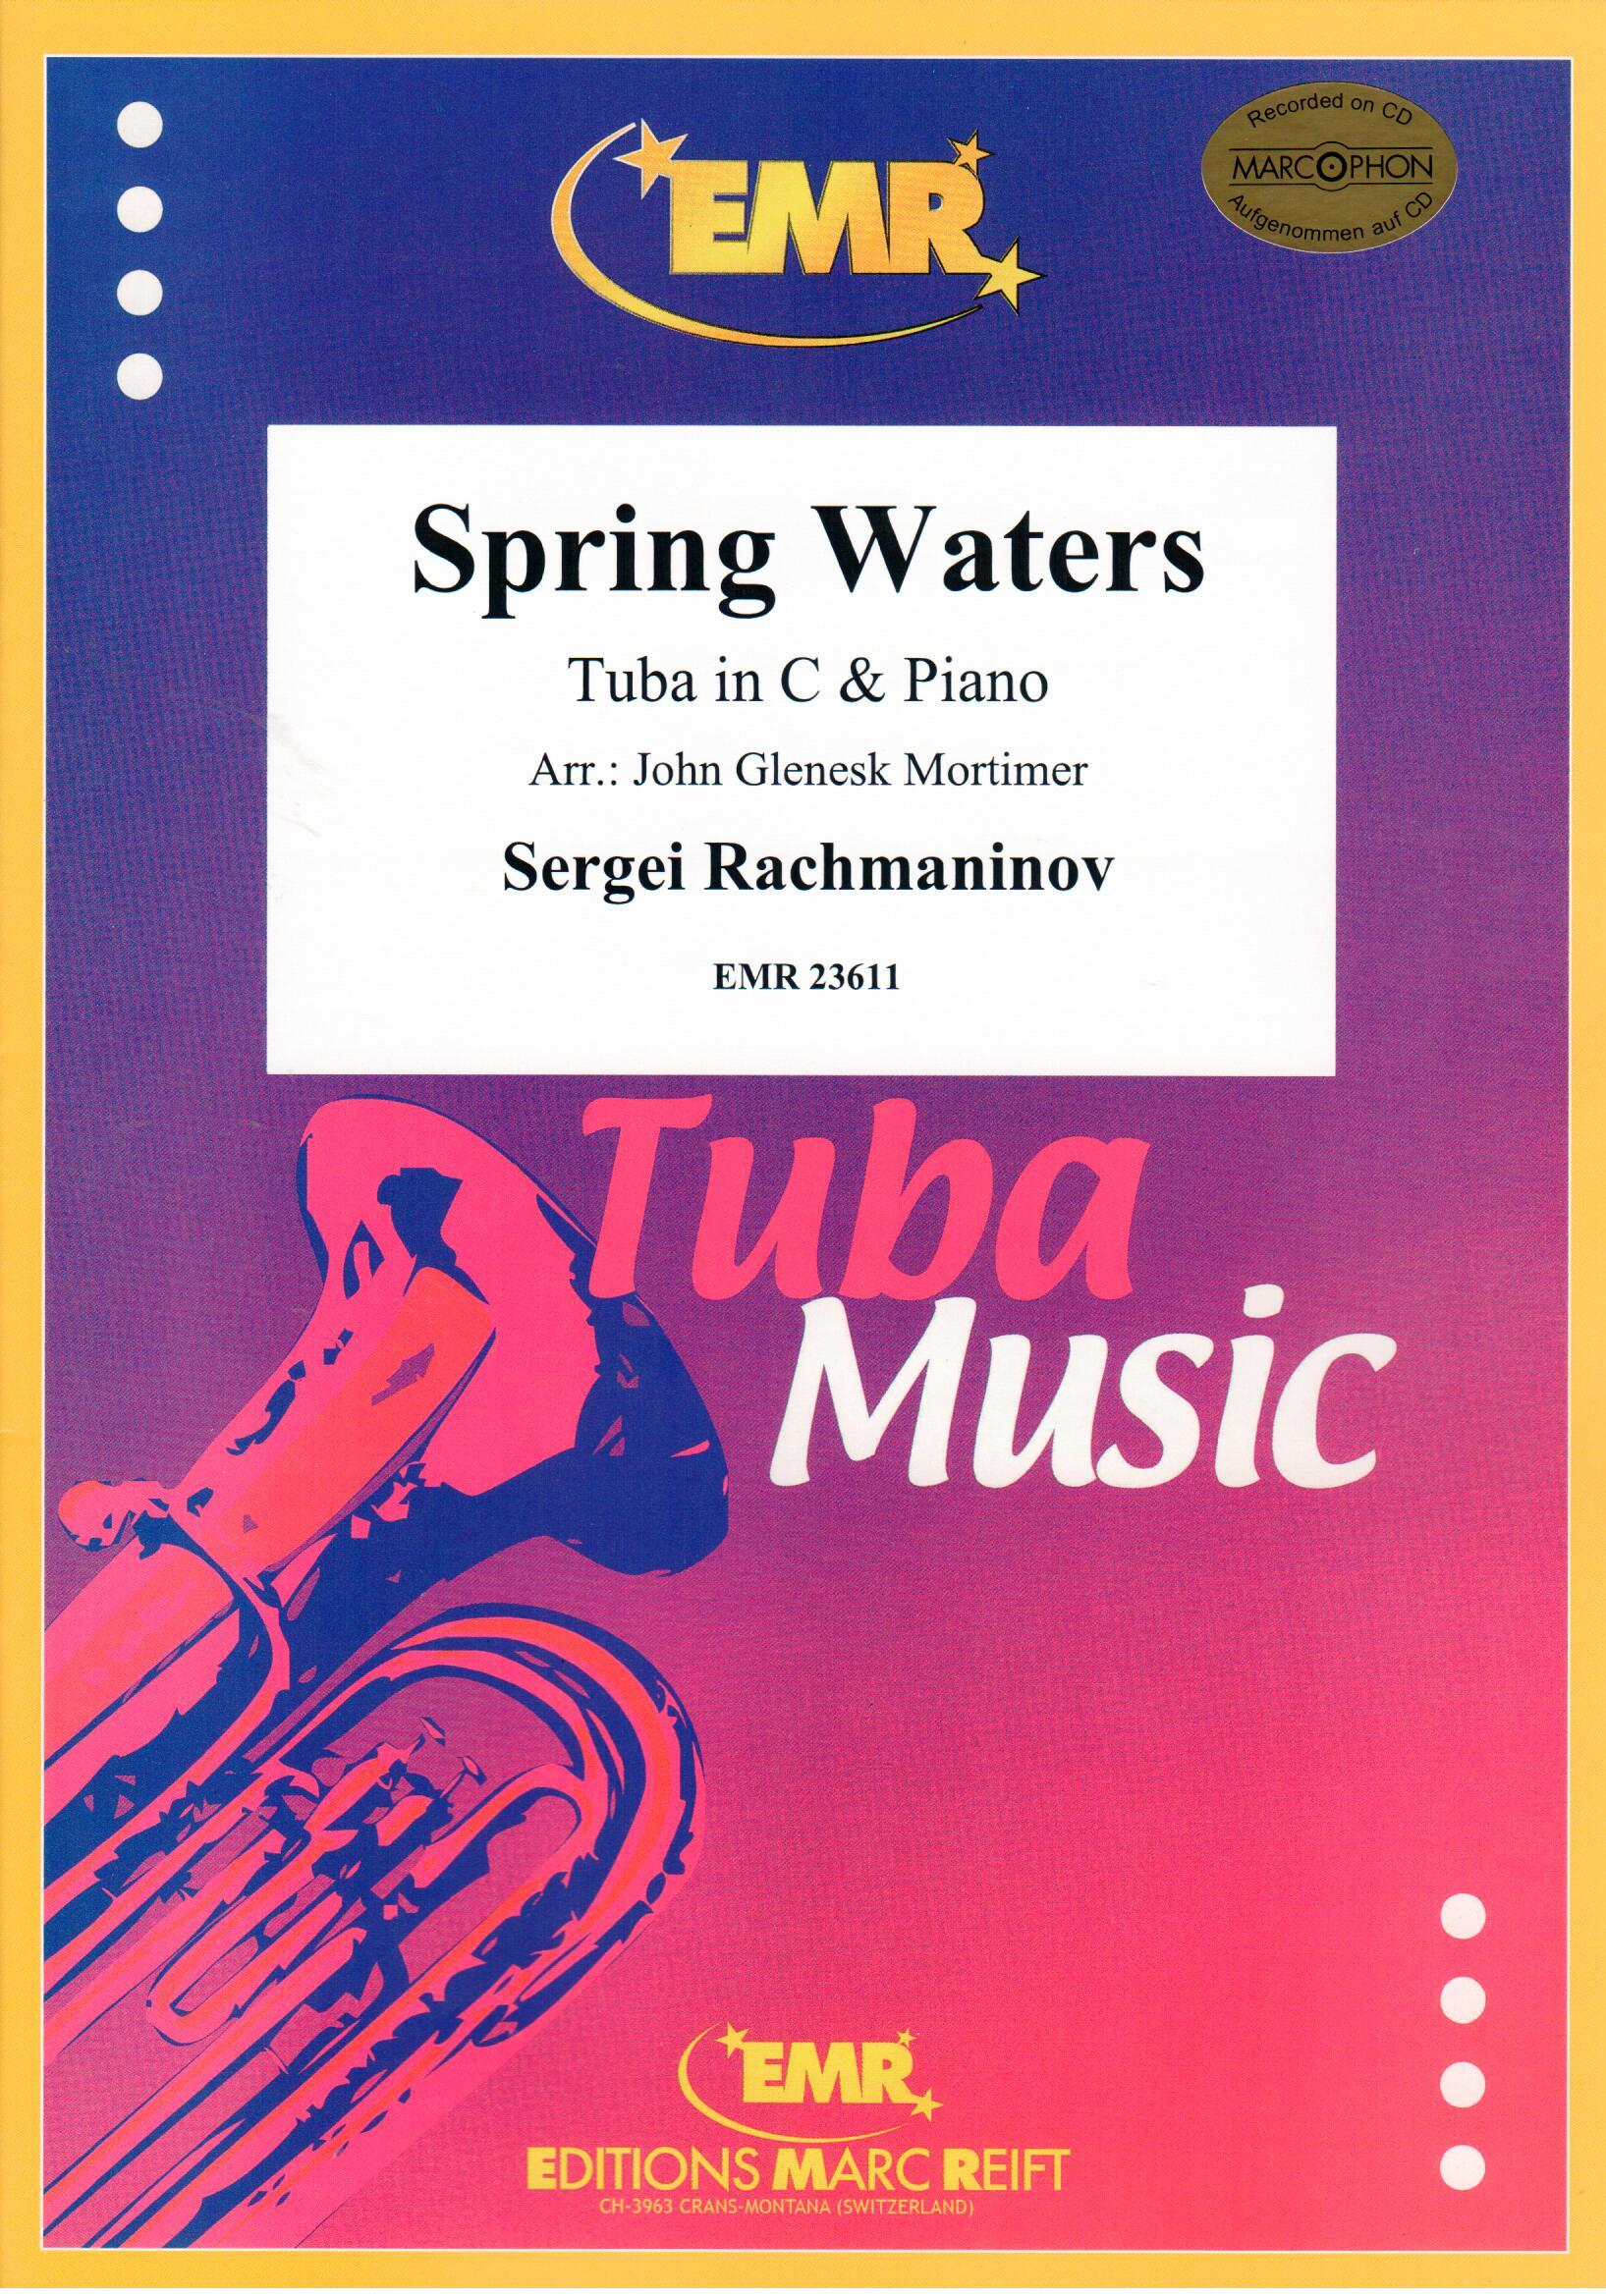 SPRING WATERS, SOLOS - E♭. Bass